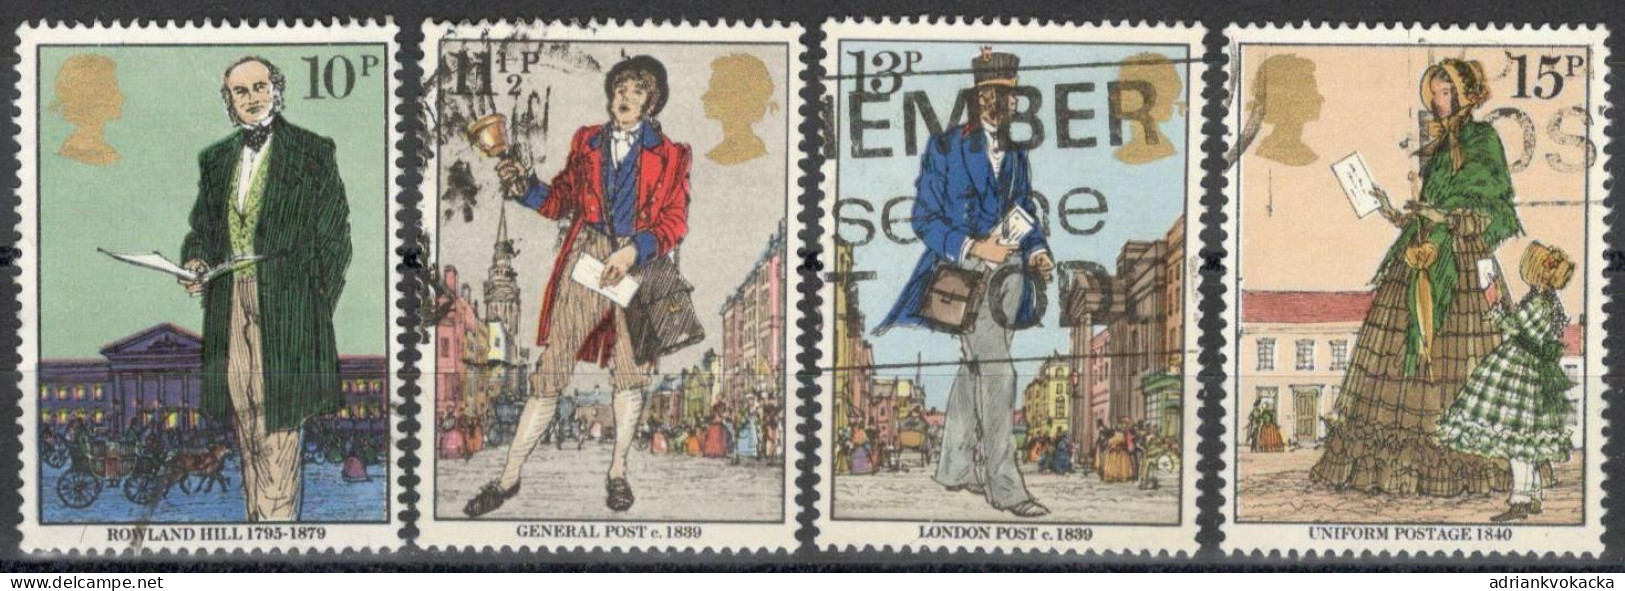 United Kingdom - Centenary Of The Death Of Sir Rowland Hill, Complete Series Of Cancelled Stamps Mi:GB 804-807 (1979) - Oblitérés